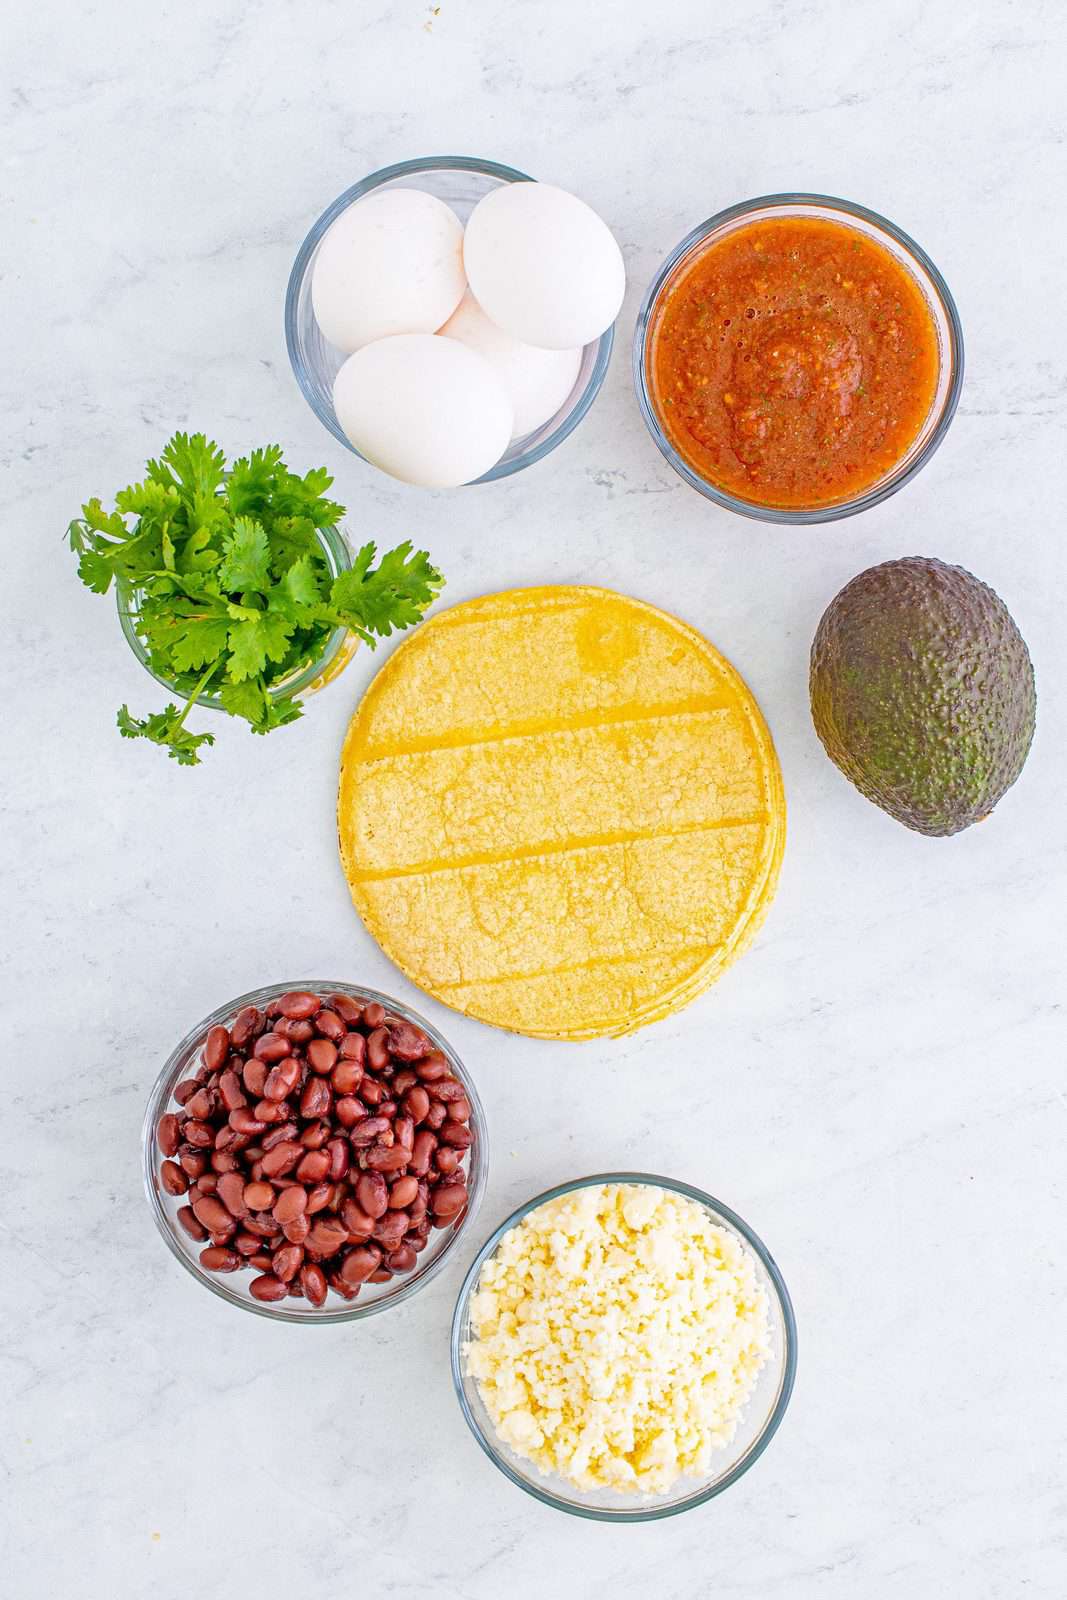 Ingredients needed: corn tortillas, eggs, black beans or ½ cup refried beans and optional toppings.